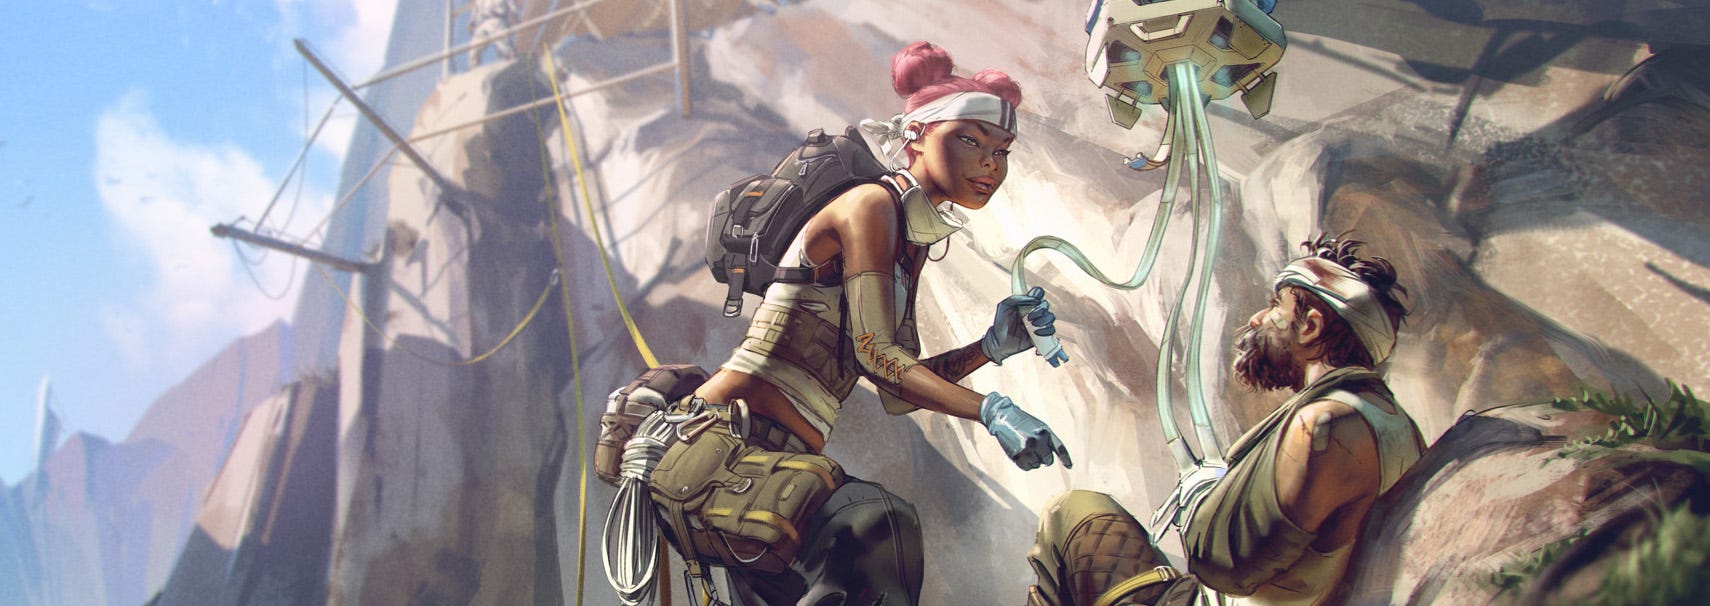 Communication In Apex Legends Communicating In Apex Legends By Charlie Deets Medium